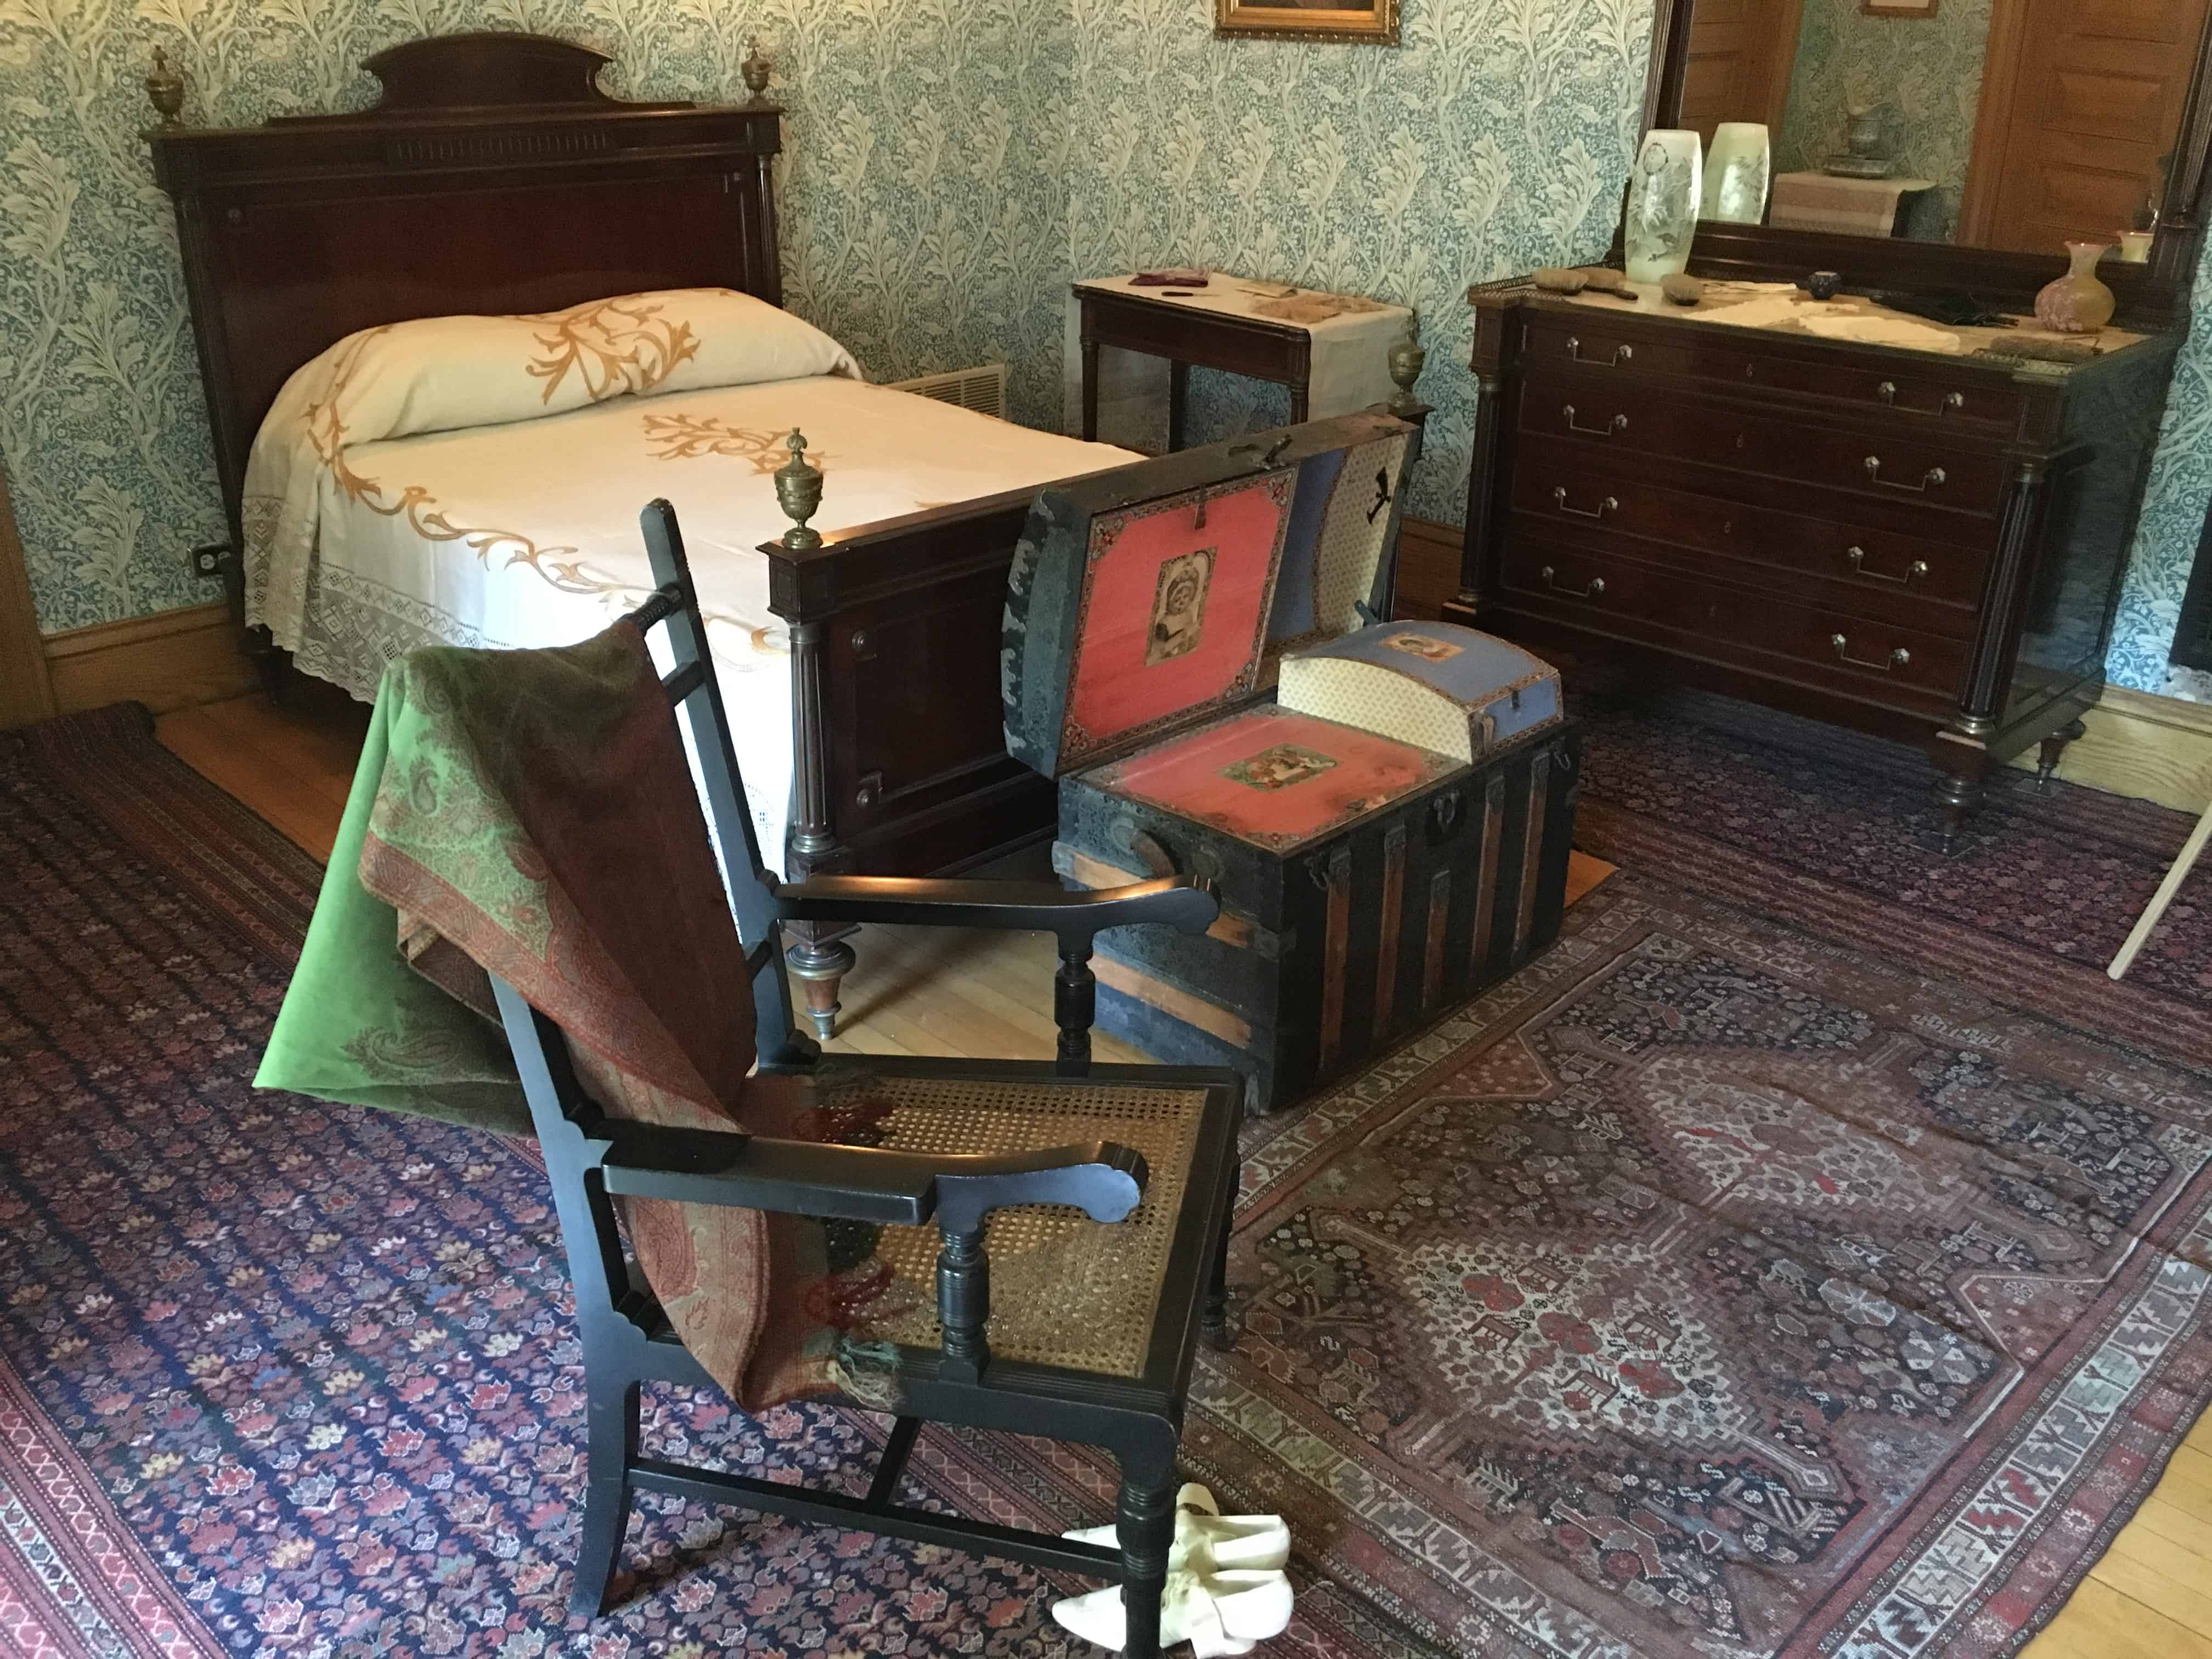 Fanny's room at the John J. Glessner House in Chicago, Illinois